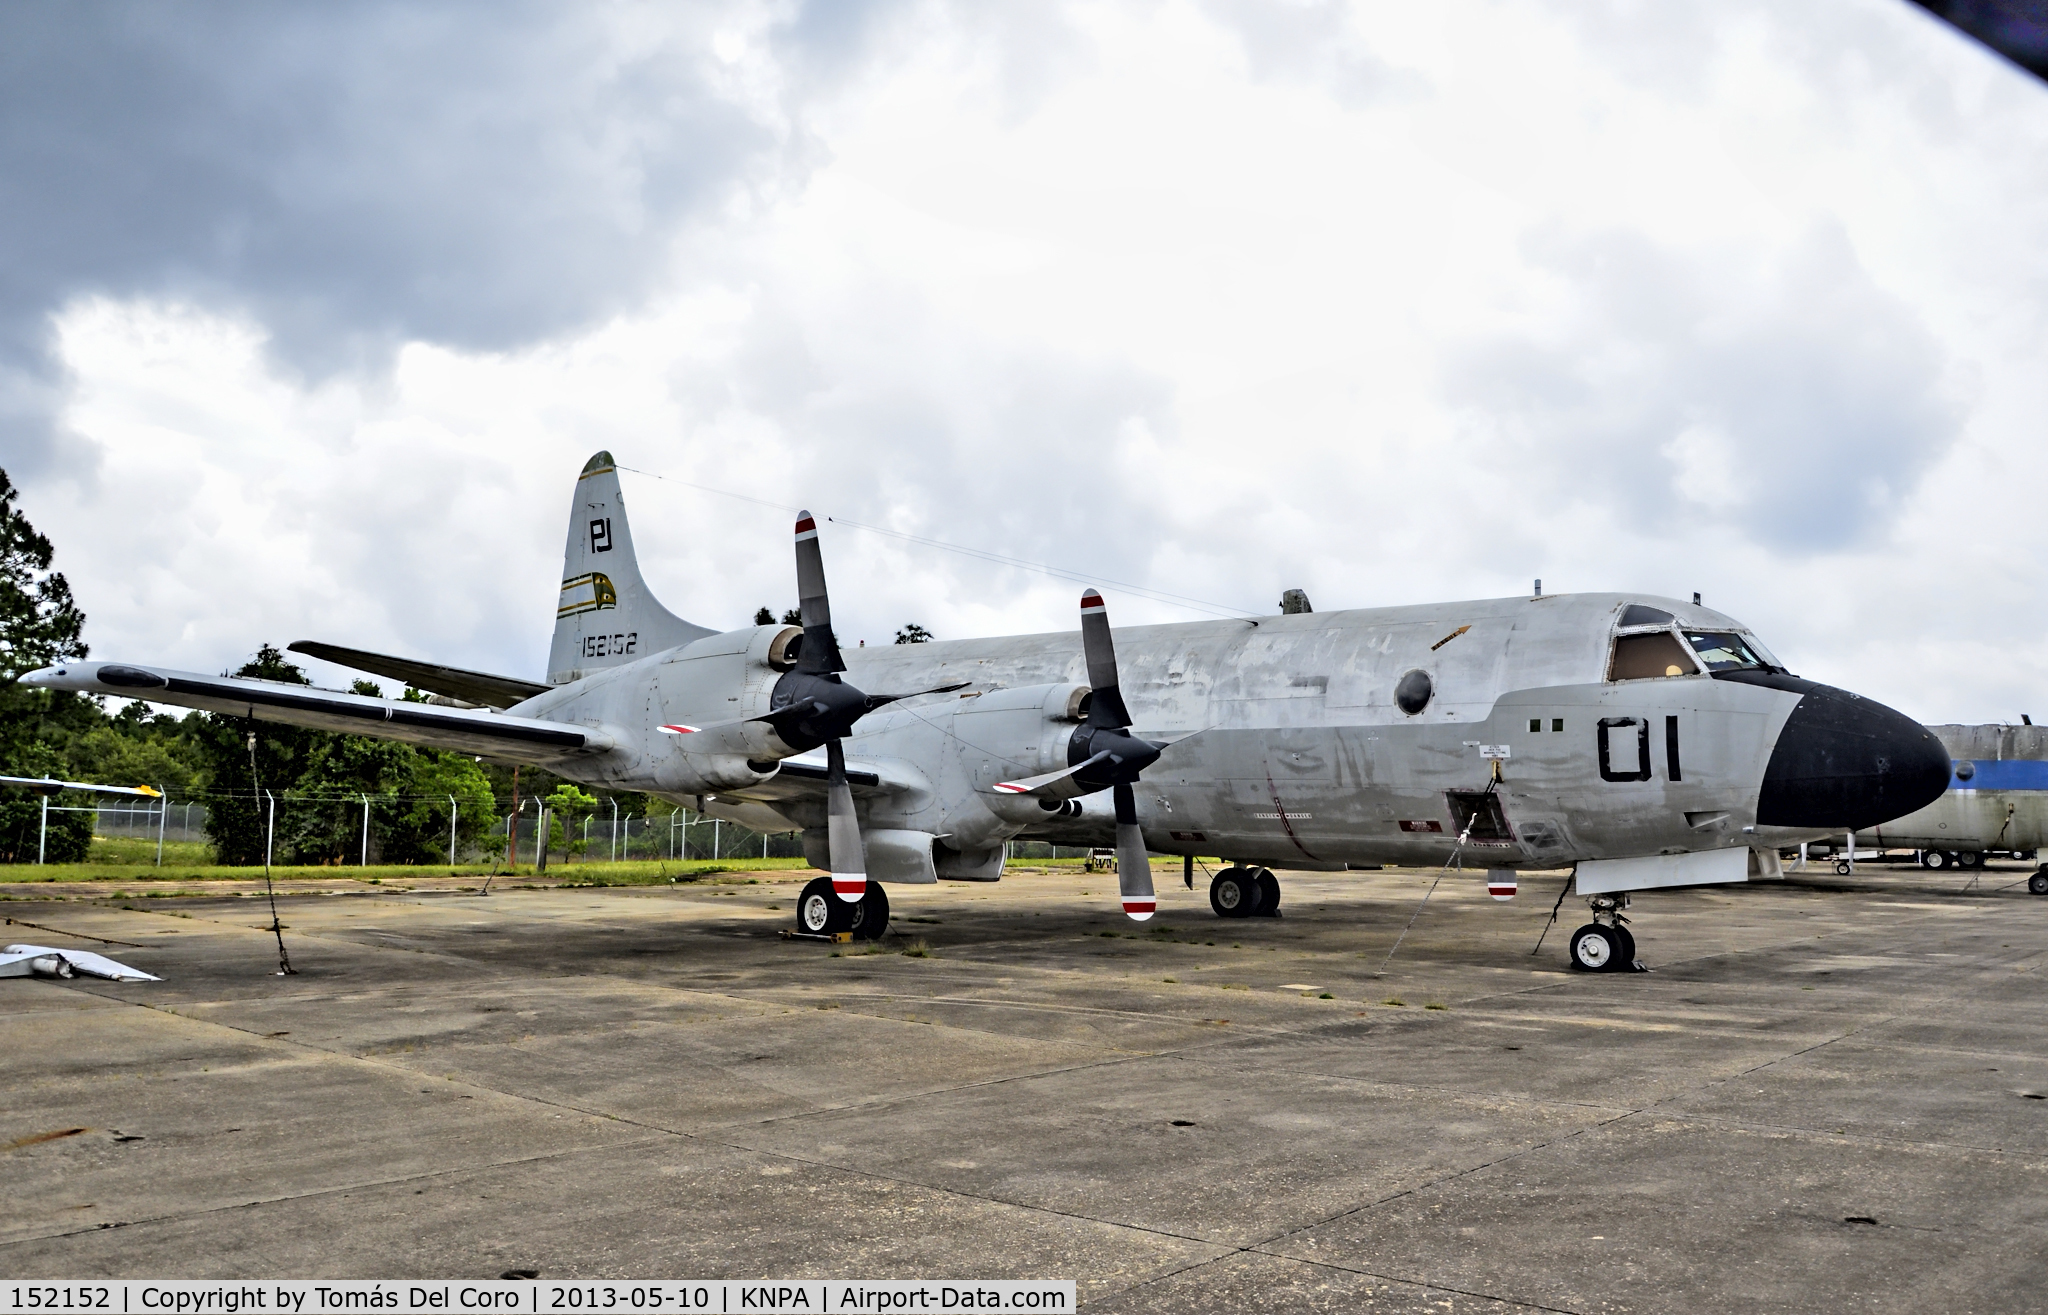 152152, Lockheed P-3A-50-LO Orion C/N 185-5122, Lockheed P-3A-50-LO Orion BuNo 152152 (C/N 185-5122)

National Naval Aviation Museum
TDelCoro
May 10, 2013